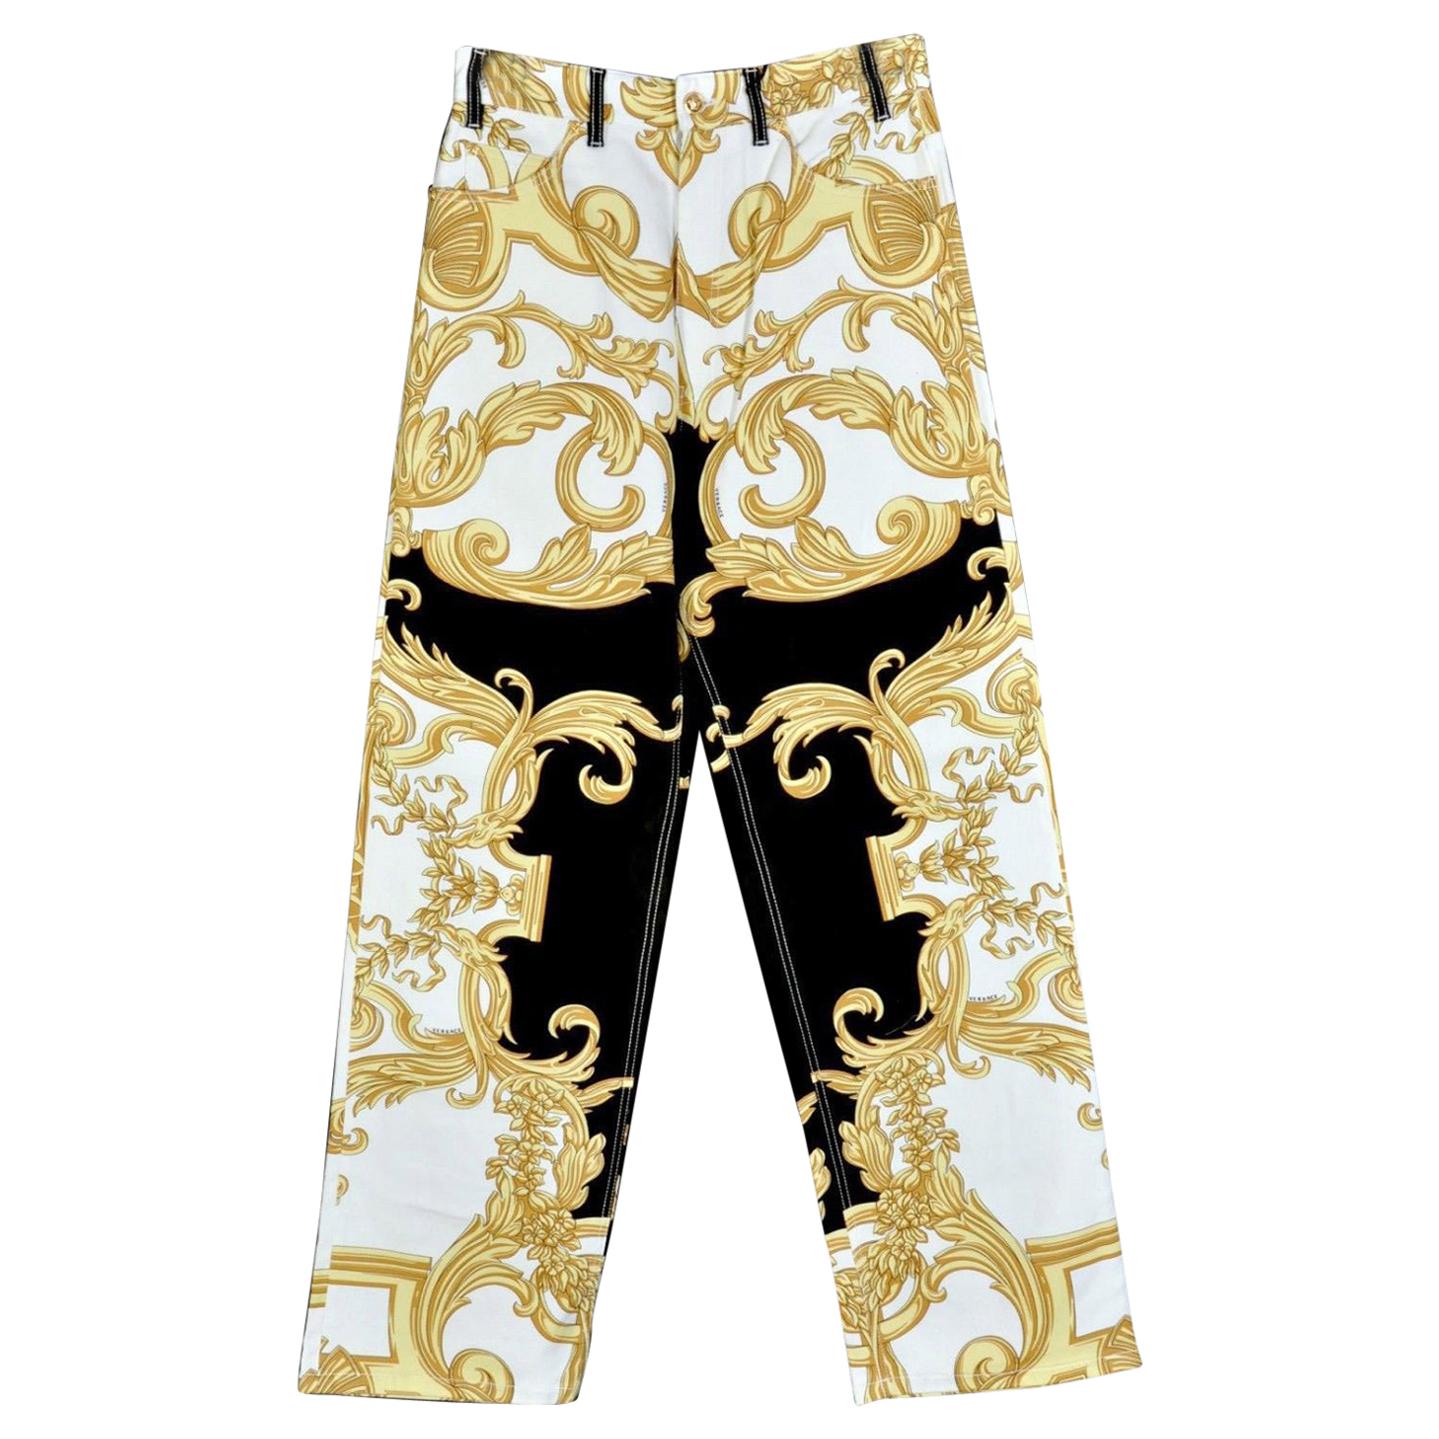 Details 65+ versace mens trousers best - in.cdgdbentre